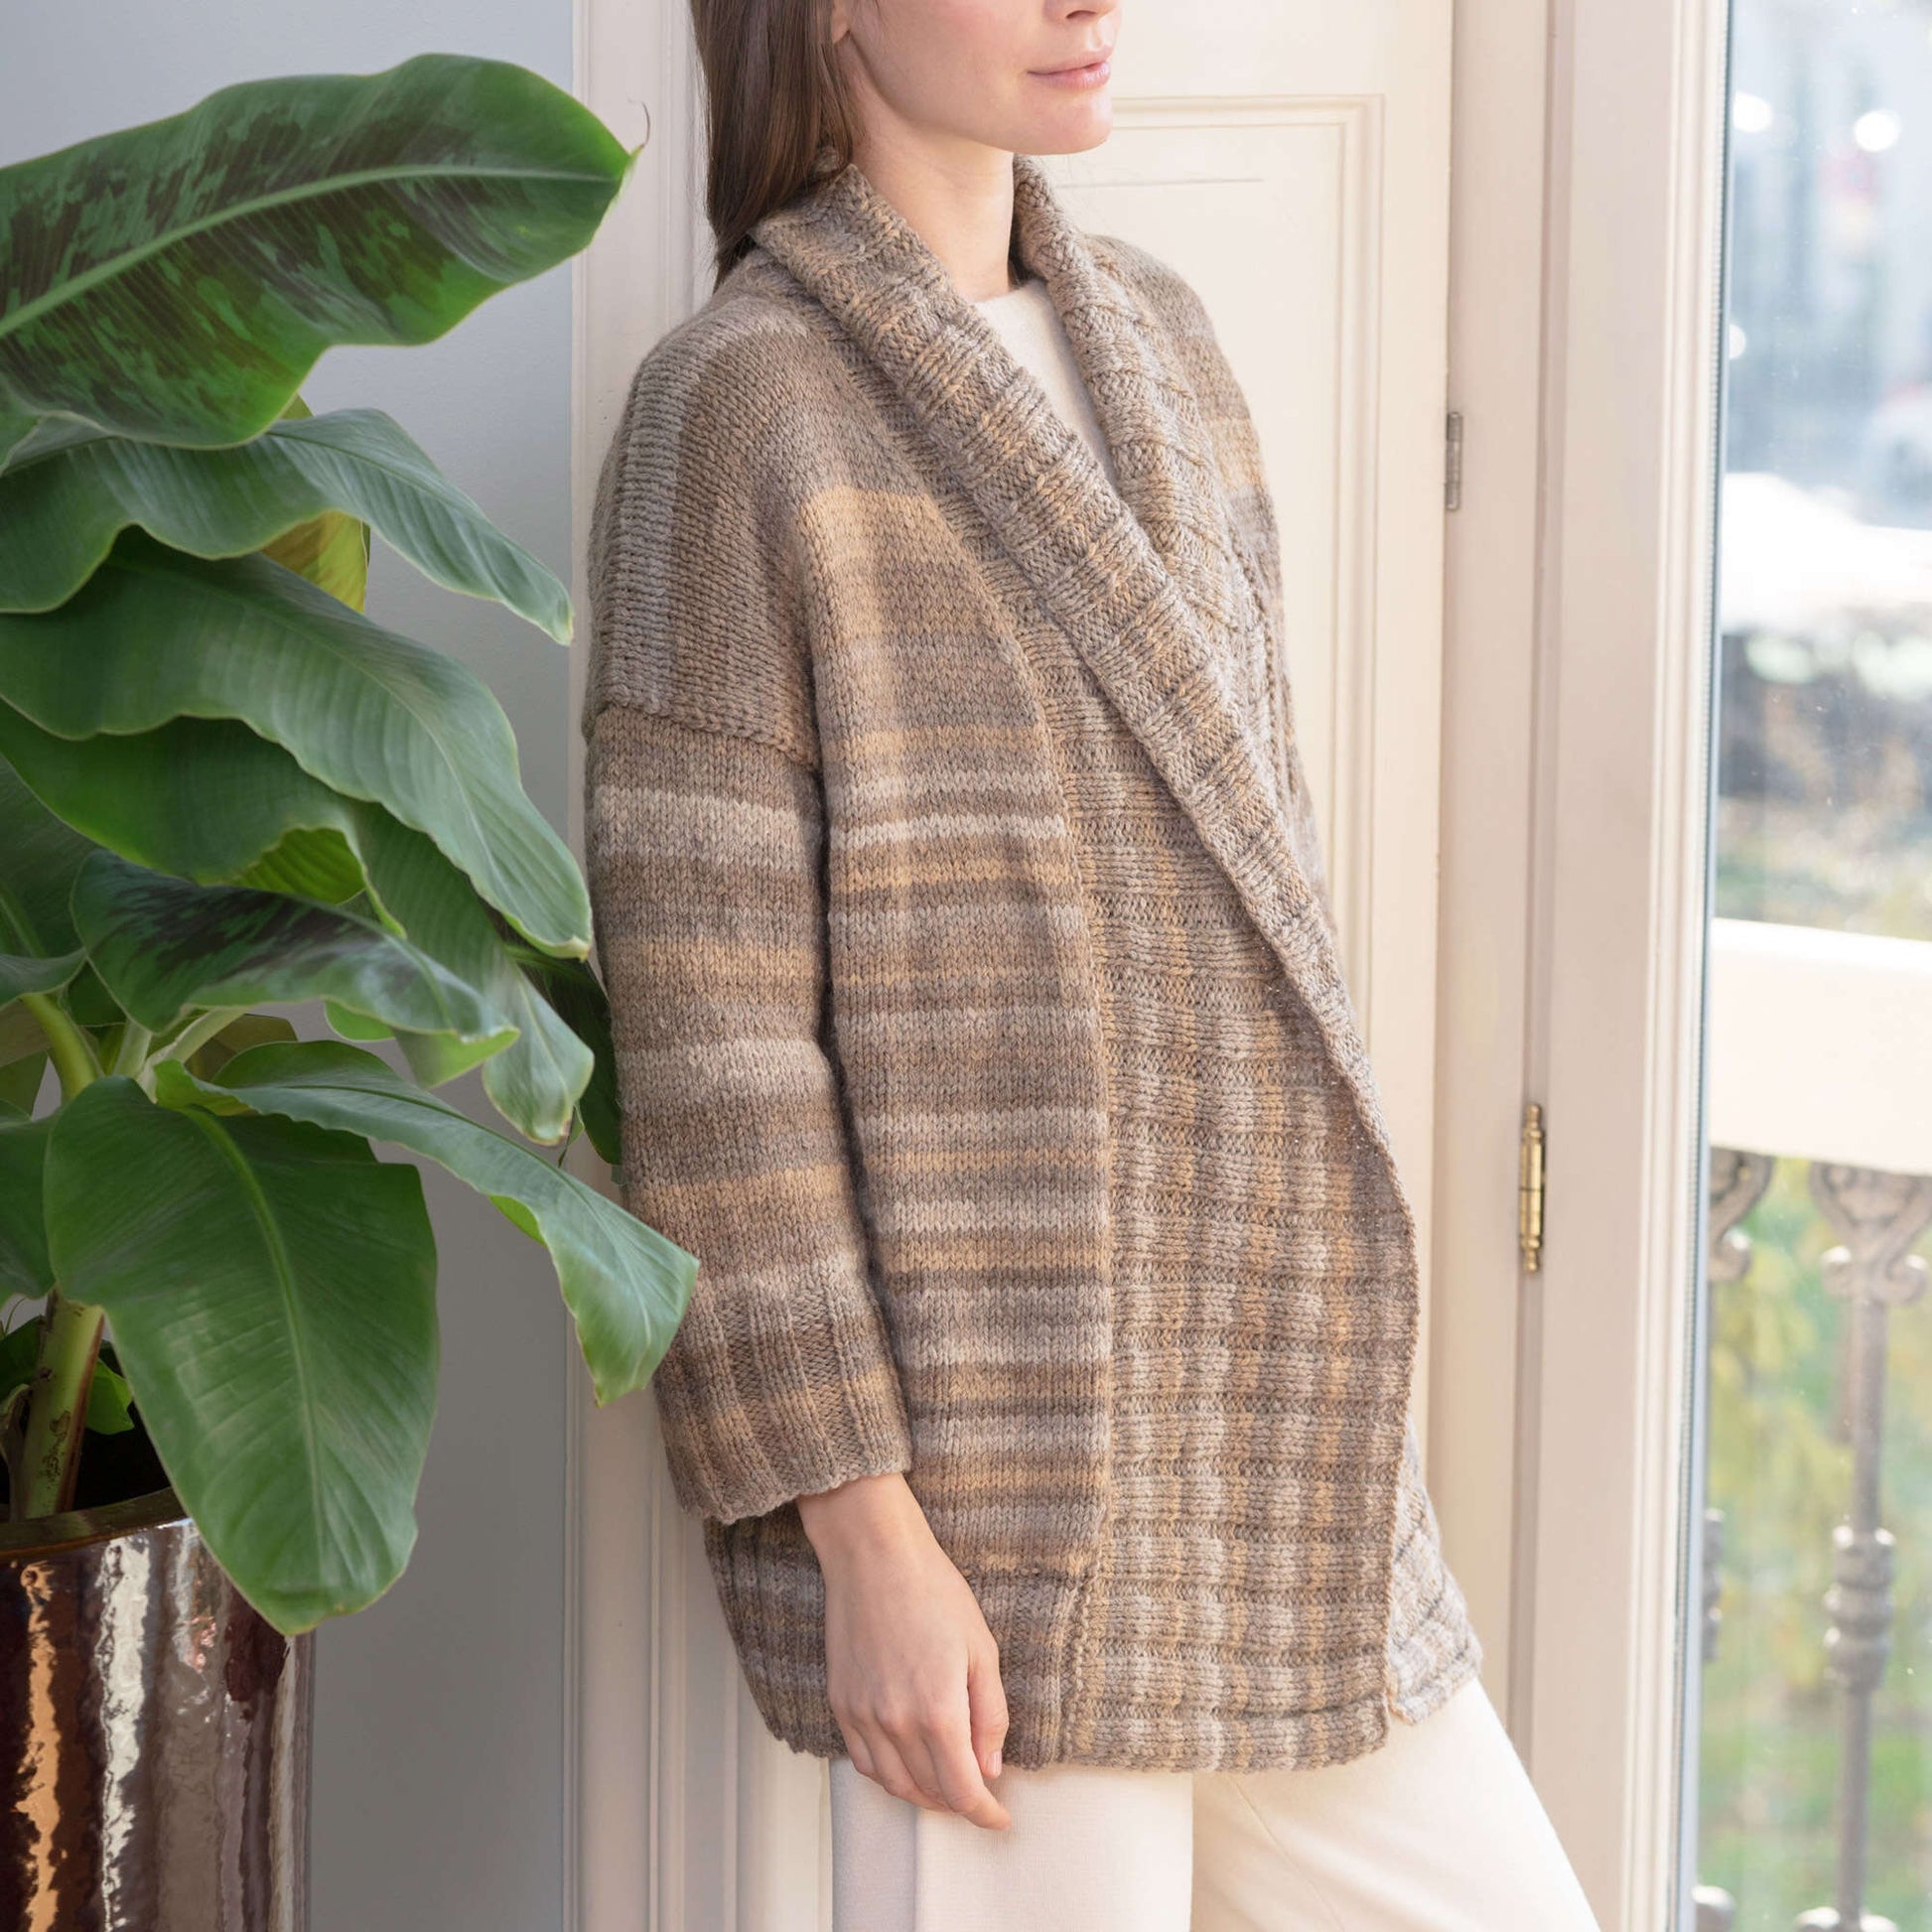 Free Red Heart Toscana Knit Cardigan Pattern